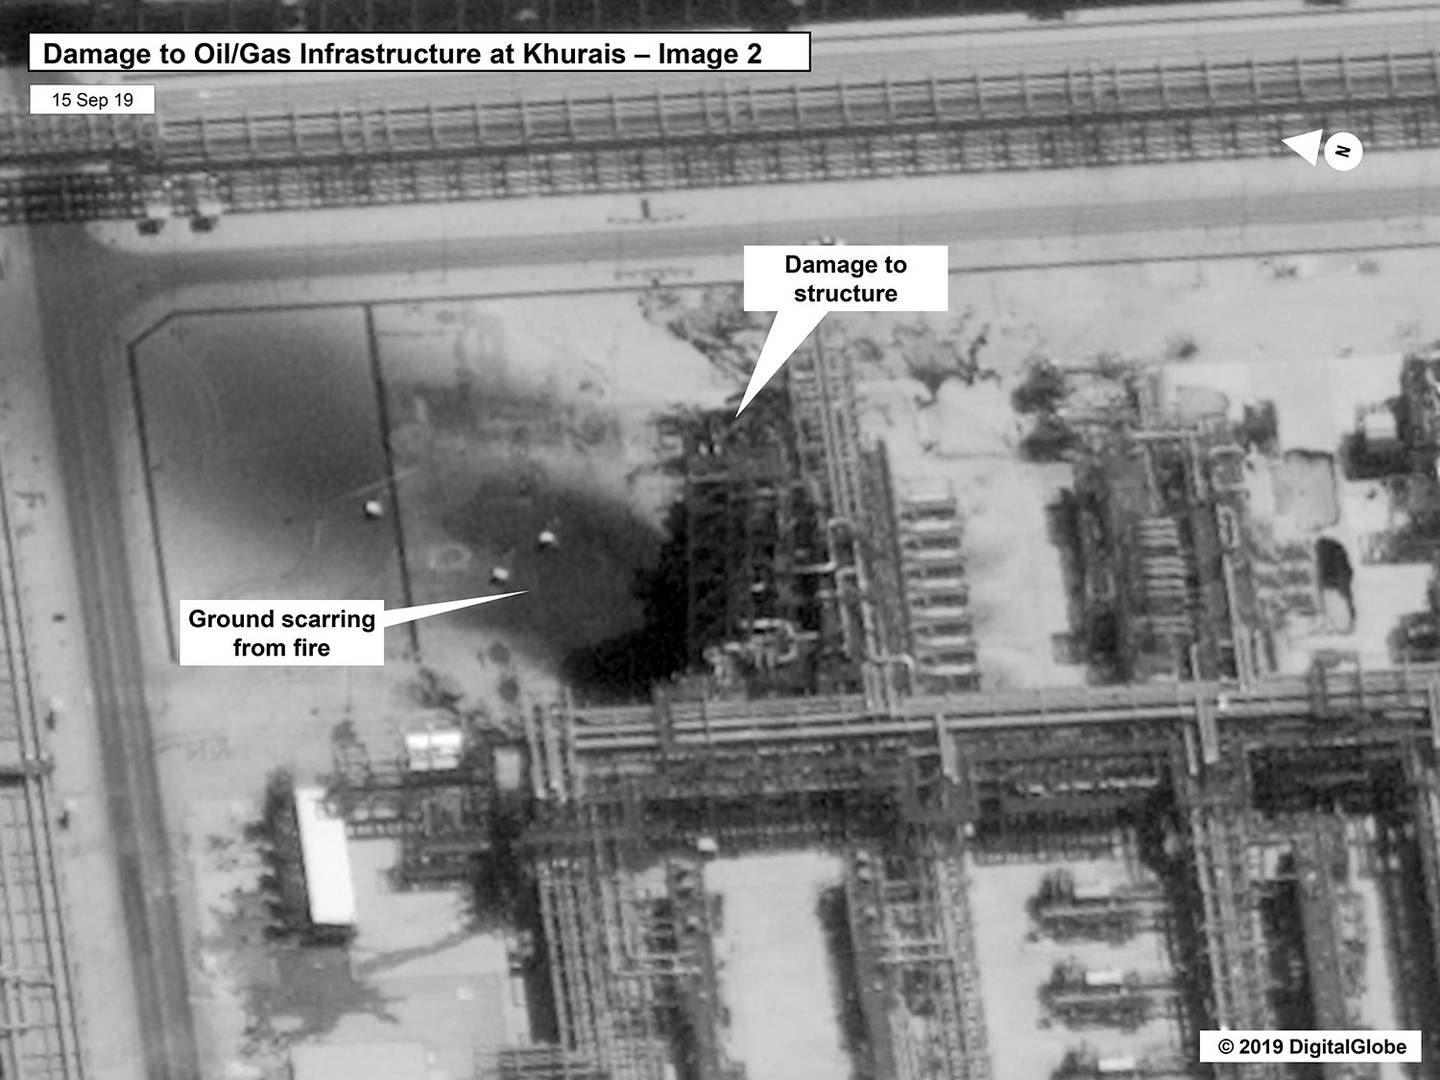 damage to the infrastructure at Saudi Aramco's Kuirais oil field